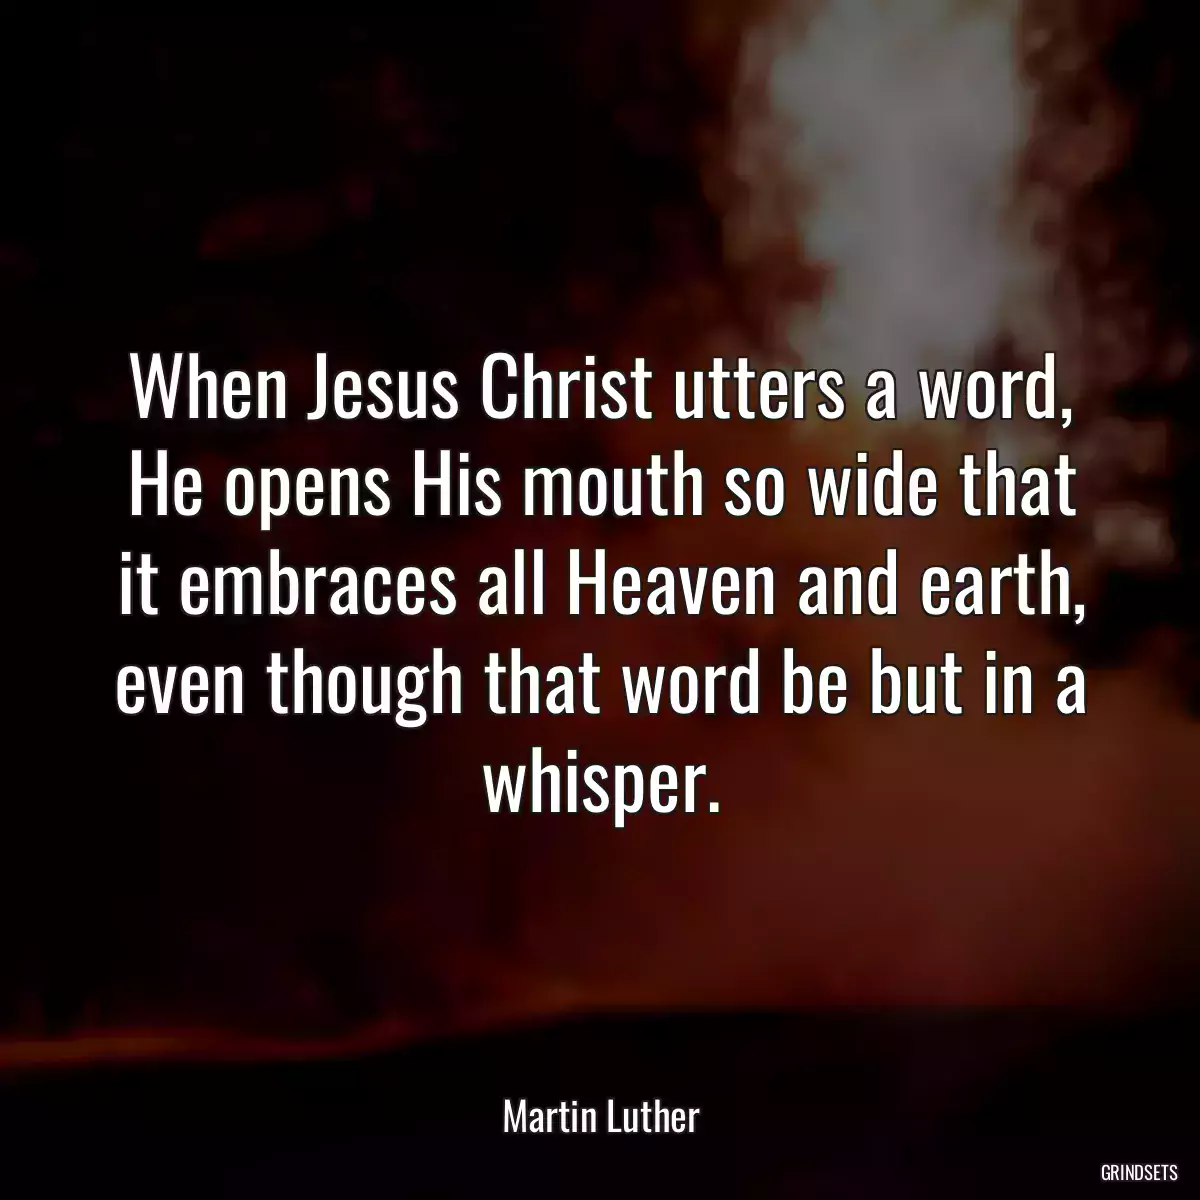 When Jesus Christ utters a word, He opens His mouth so wide that it embraces all Heaven and earth, even though that word be but in a whisper.